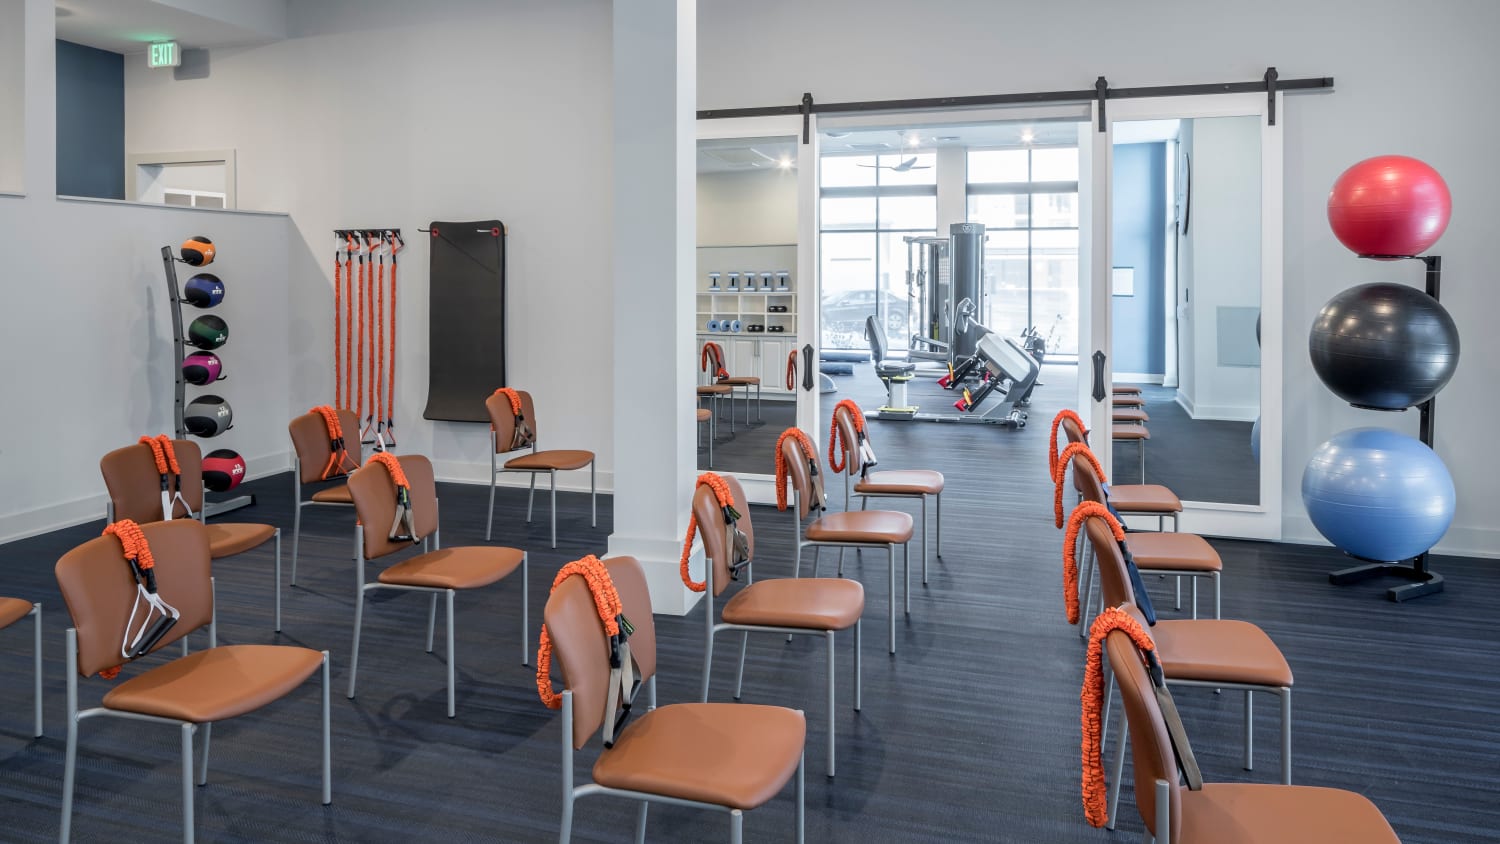 Exercise room at our over 55 apartments in Lakewood, CO, featuring spin bikes, weights, and exercise equipment. 